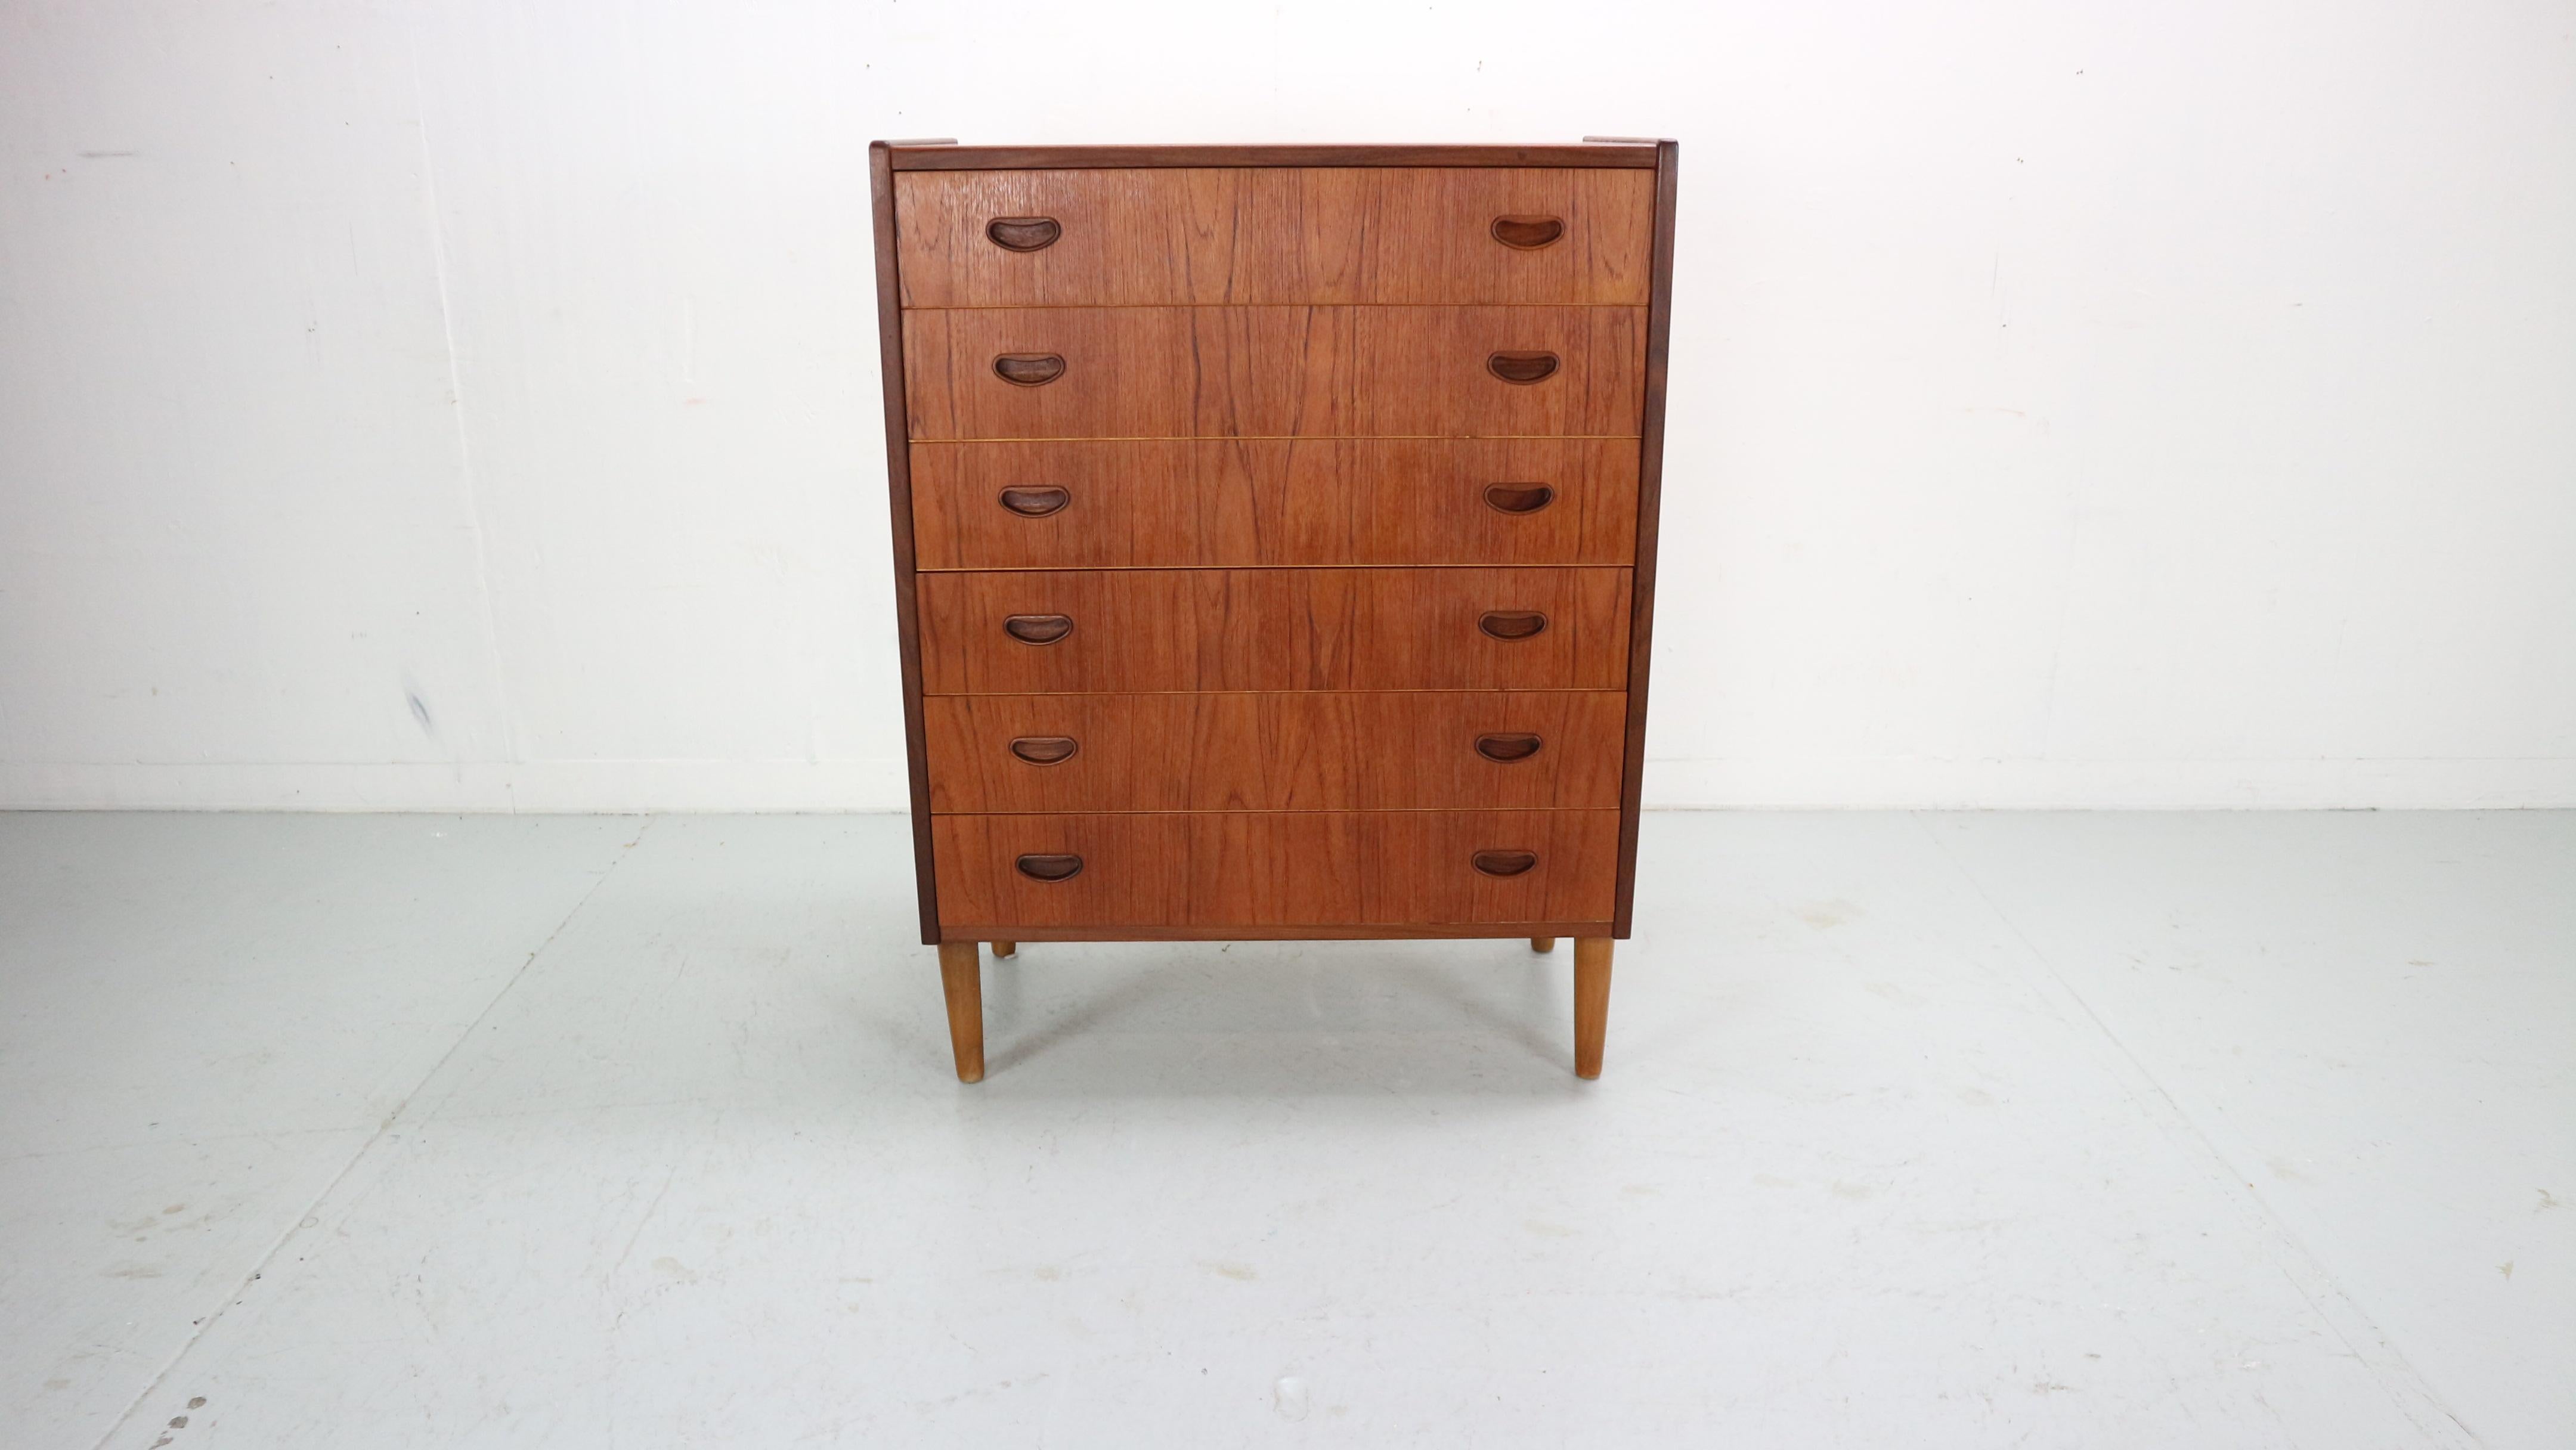 Mid- Century modern period chest of 6 drawers or tallboy cabinet made in 1960's Denmark.

Made of teak wood veneer. Elegant handles from both sides.
Good working sliding drawers.
High quality Danish furniture.

The cabinet is in a good vintage